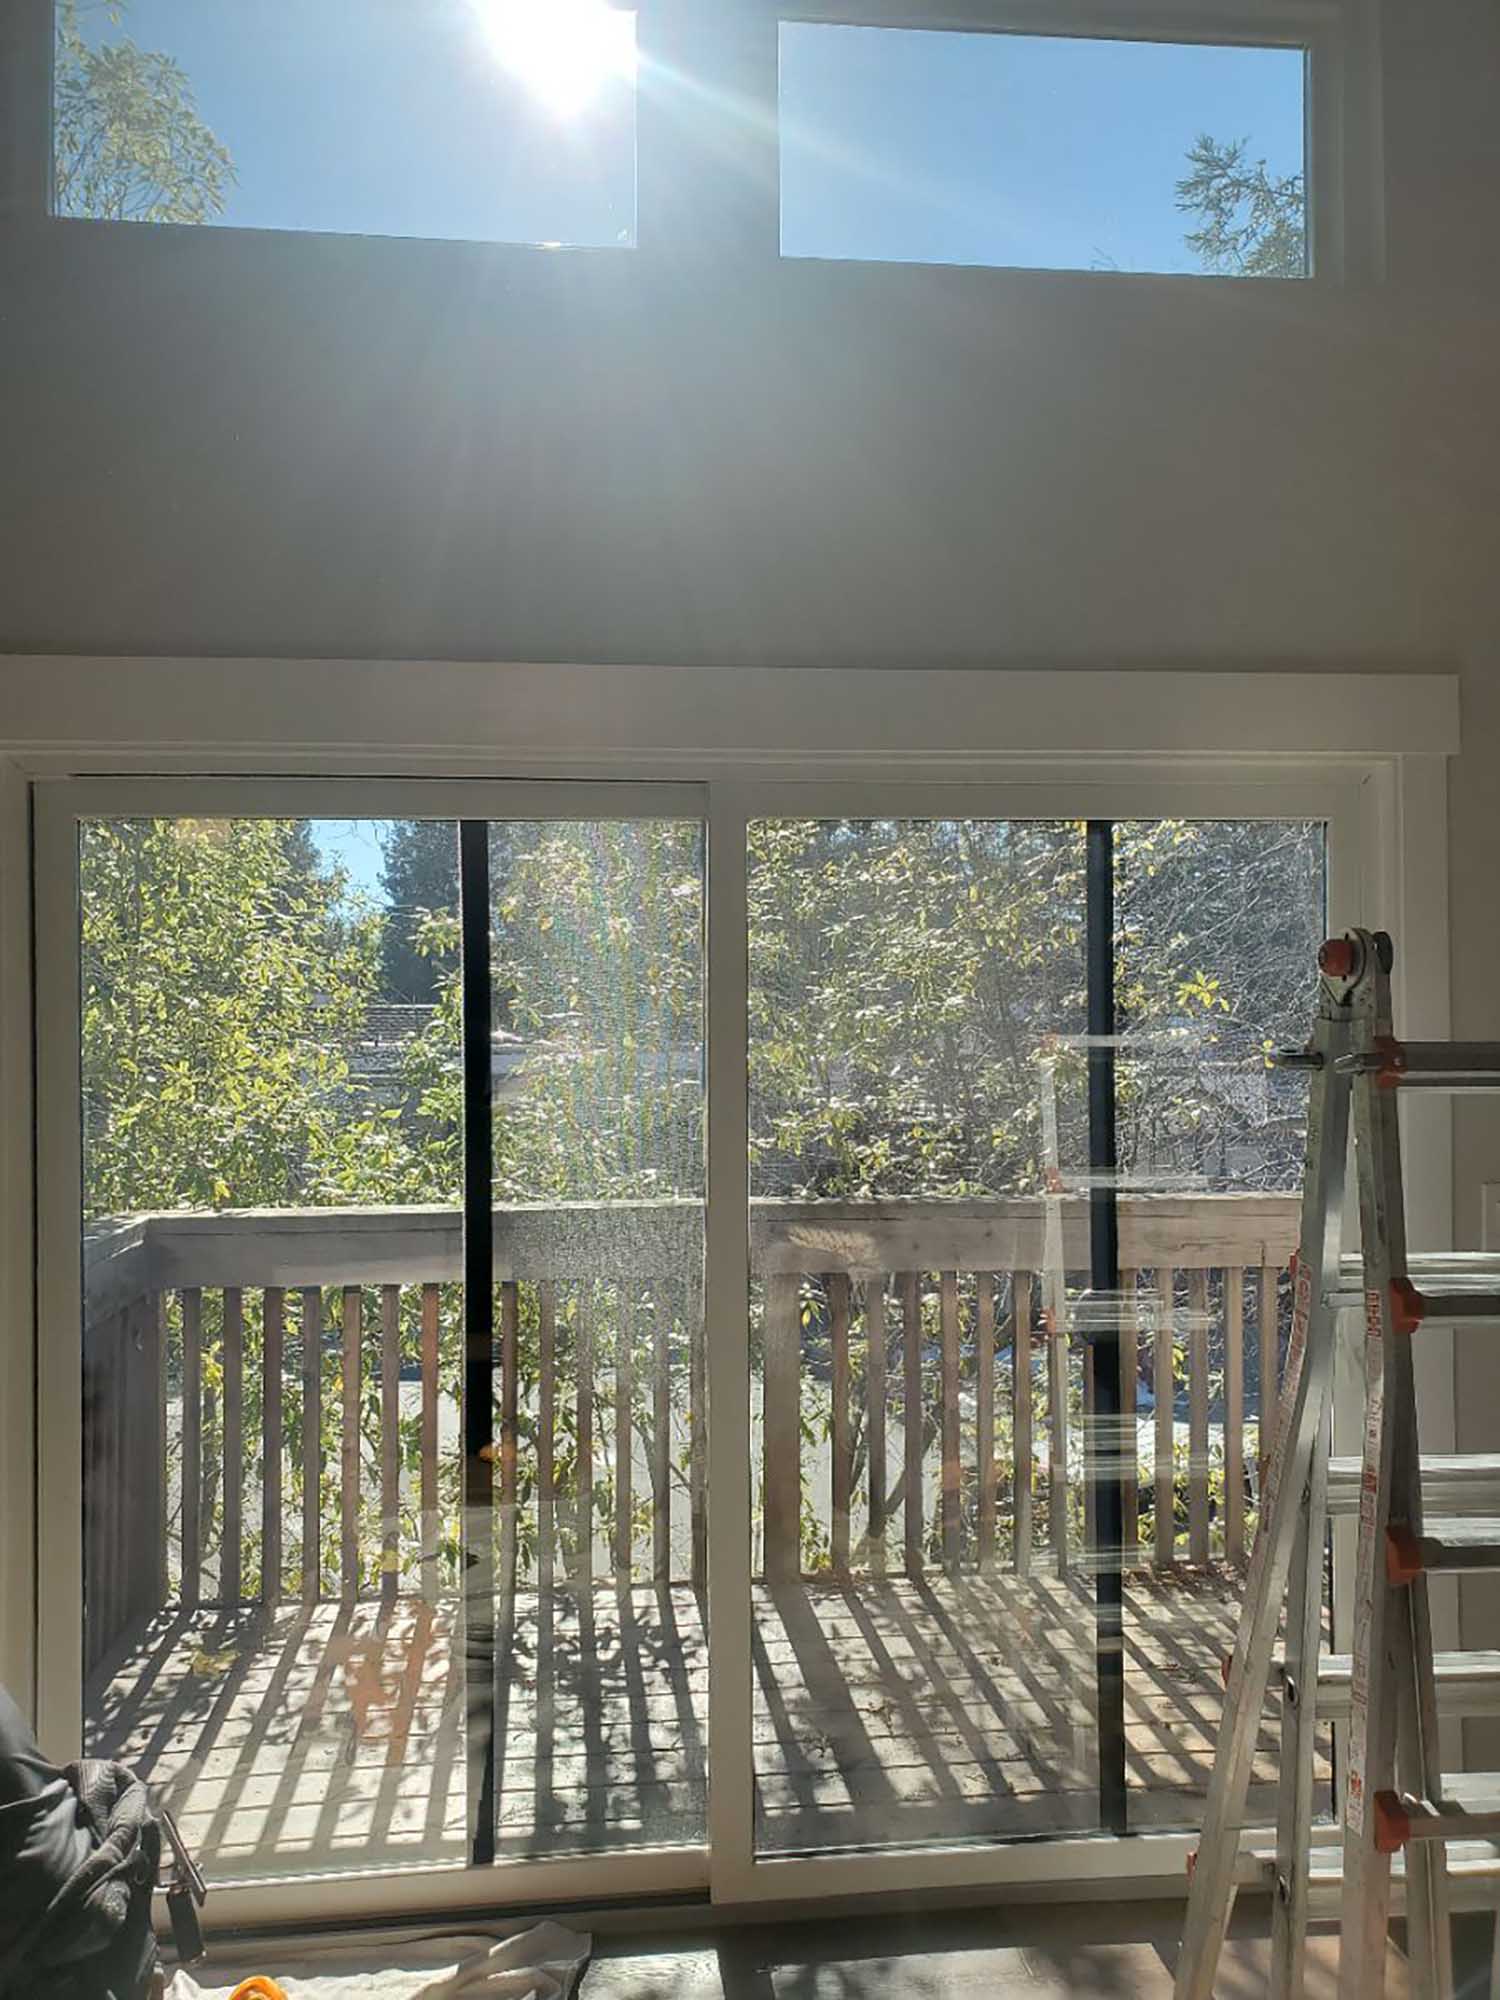 3M Night Vision Window Film is a great sun control solution. Get a free estimate today from ClimatePro.